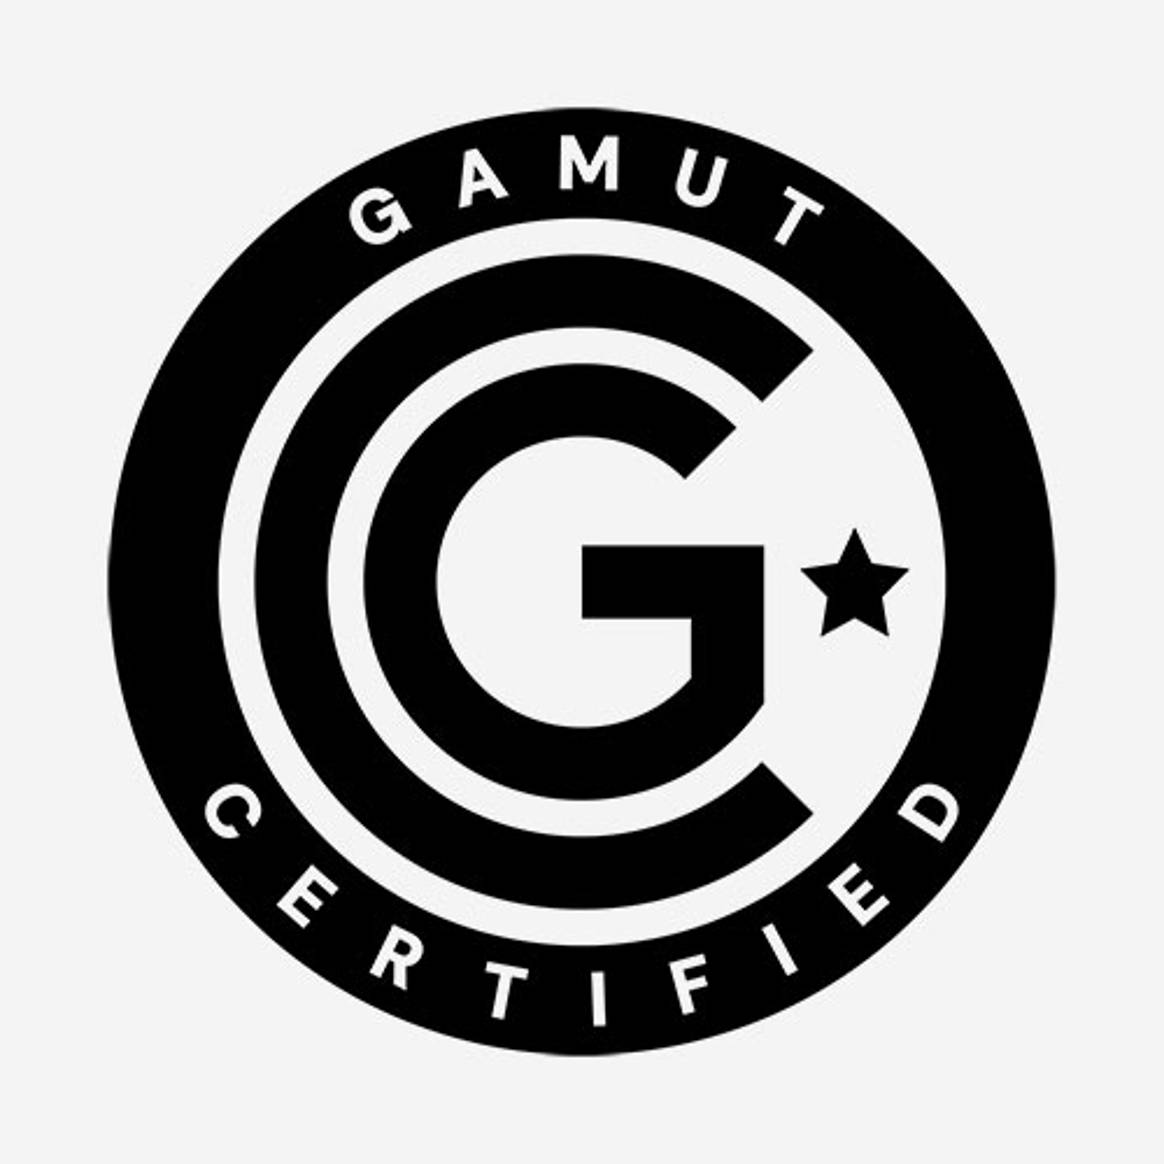 The Gamut Seal of Approval is the first of its kind certification for
adaptive clothing